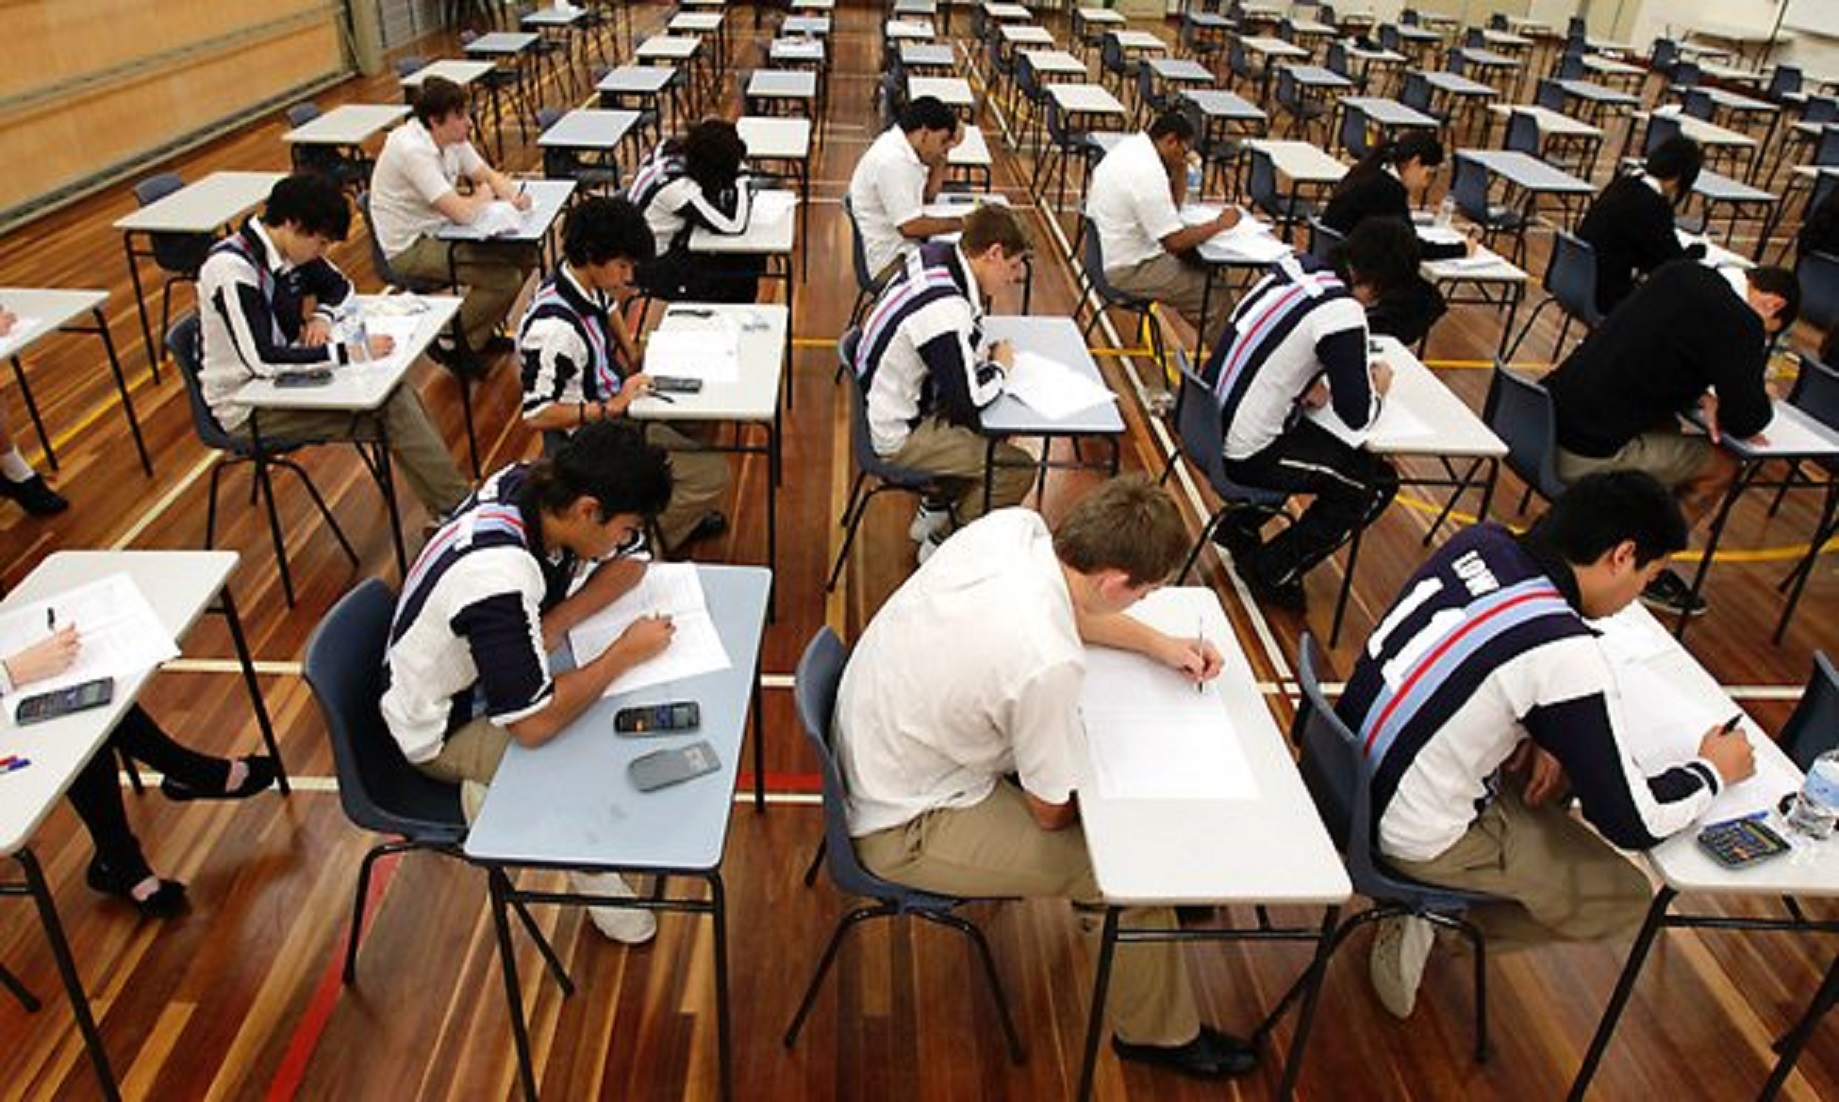 Aussie Students Tackle Final School Exams Under Strict COVID-19 Conditions